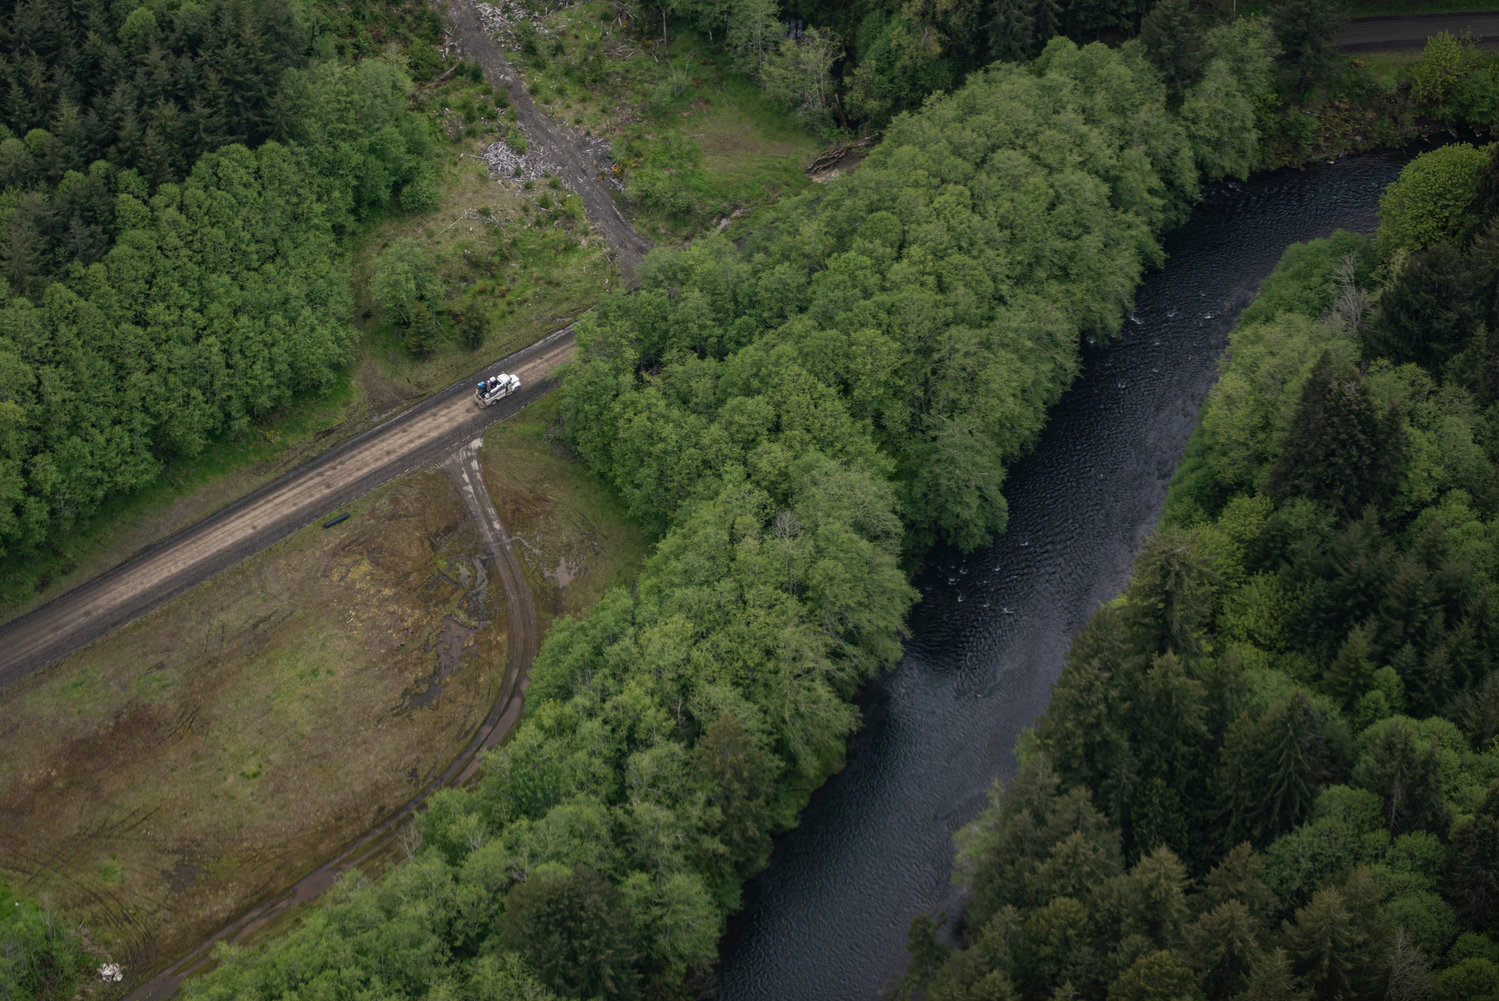 A logging truck is pictured near the headwaters of the Chehalis River on Weyerhaeuser property upstream of Pe Ell.